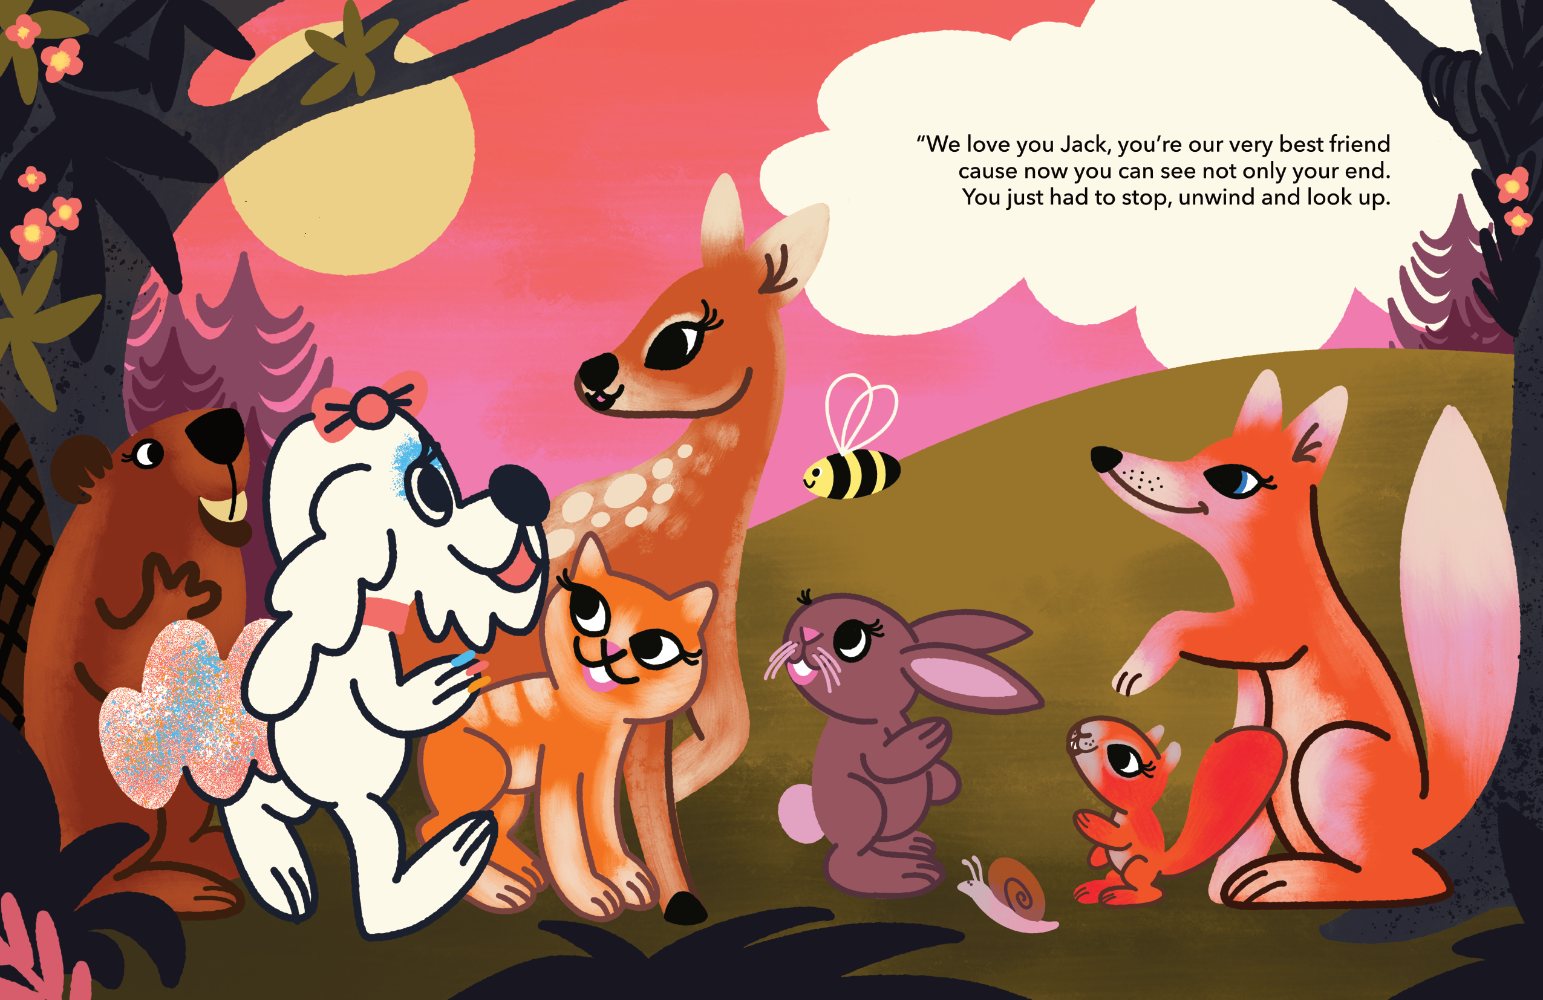 whats-beyond-may-head-childrens-book-page-spread-2-lars-madsen-illustration.png